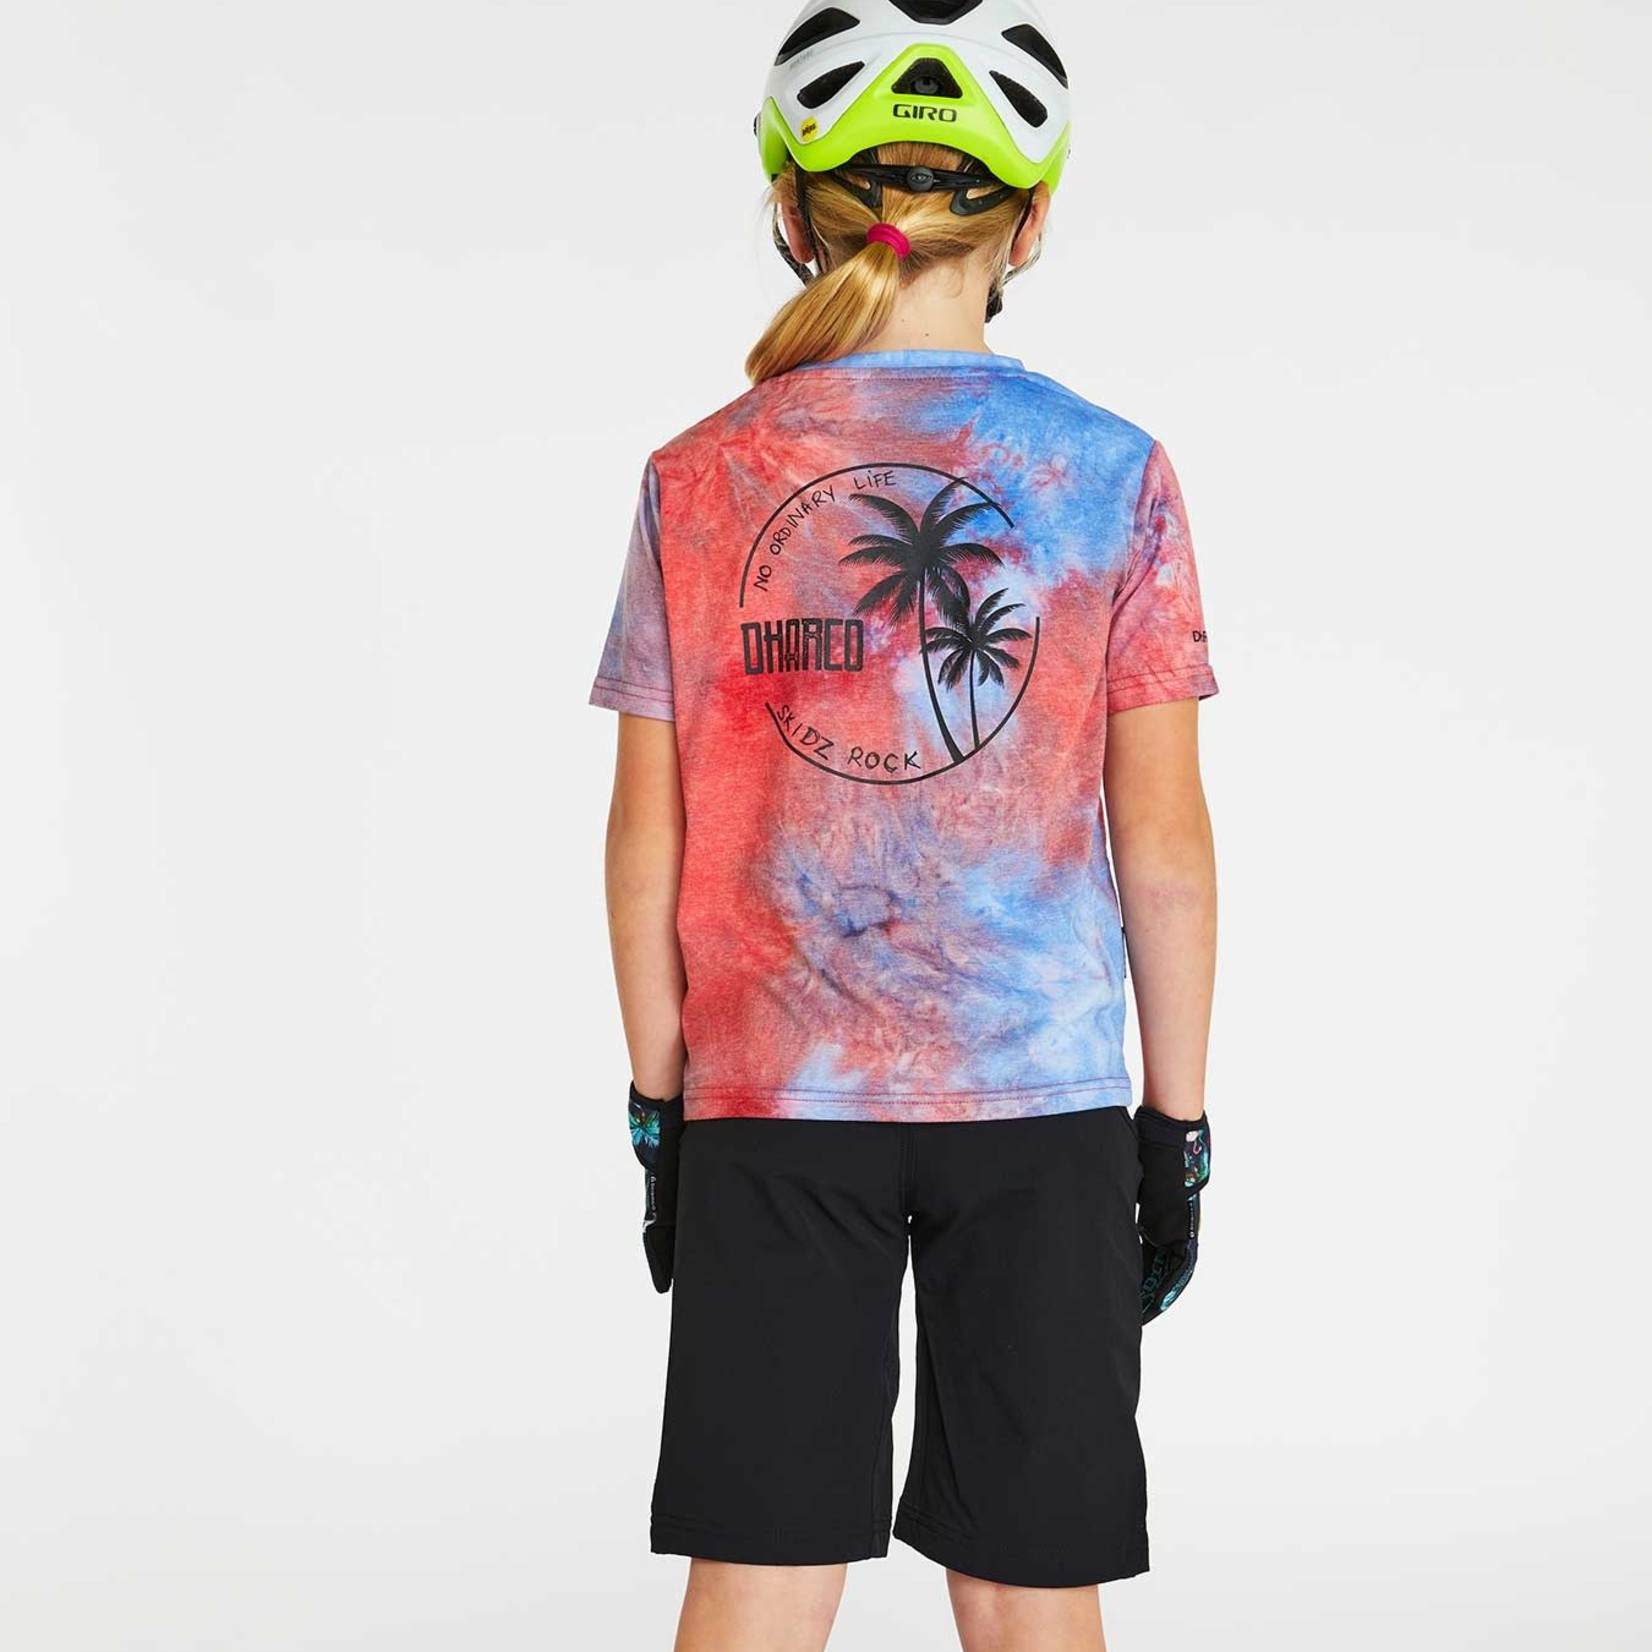 DHaRCO DHaRCO Youth Tech Tee Skids Rock YM/8